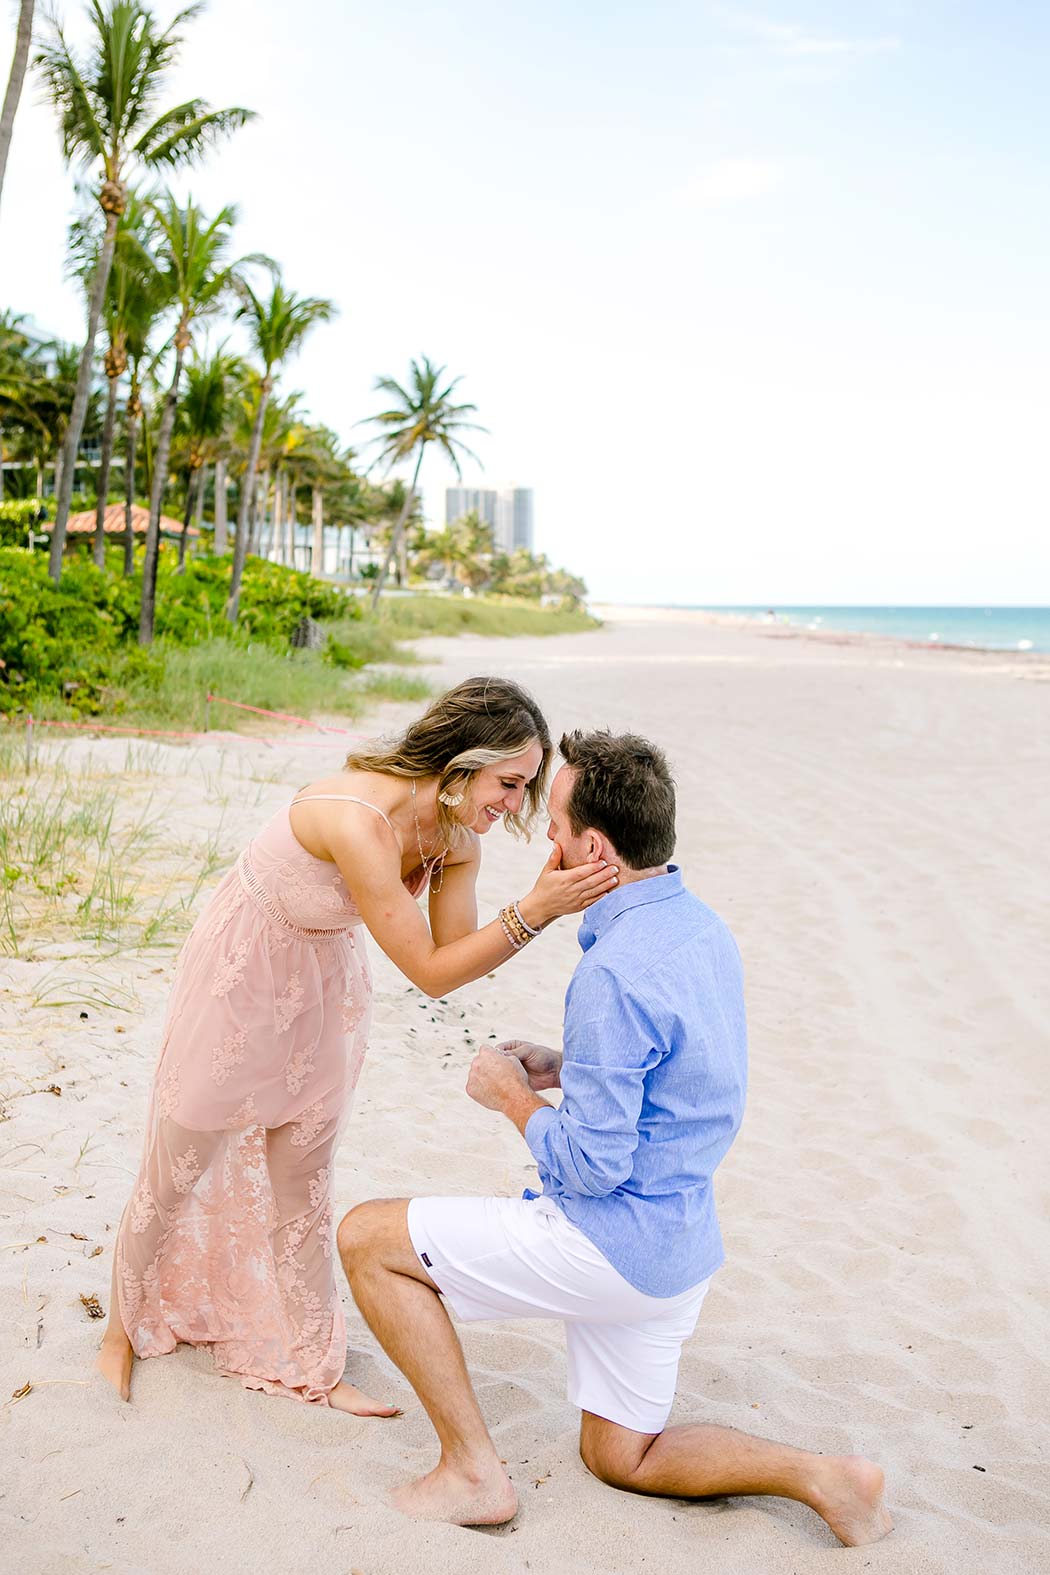 couple embrace on fort lauderdale beach after recently getting engaged | engagement photography fort lauderdale beach